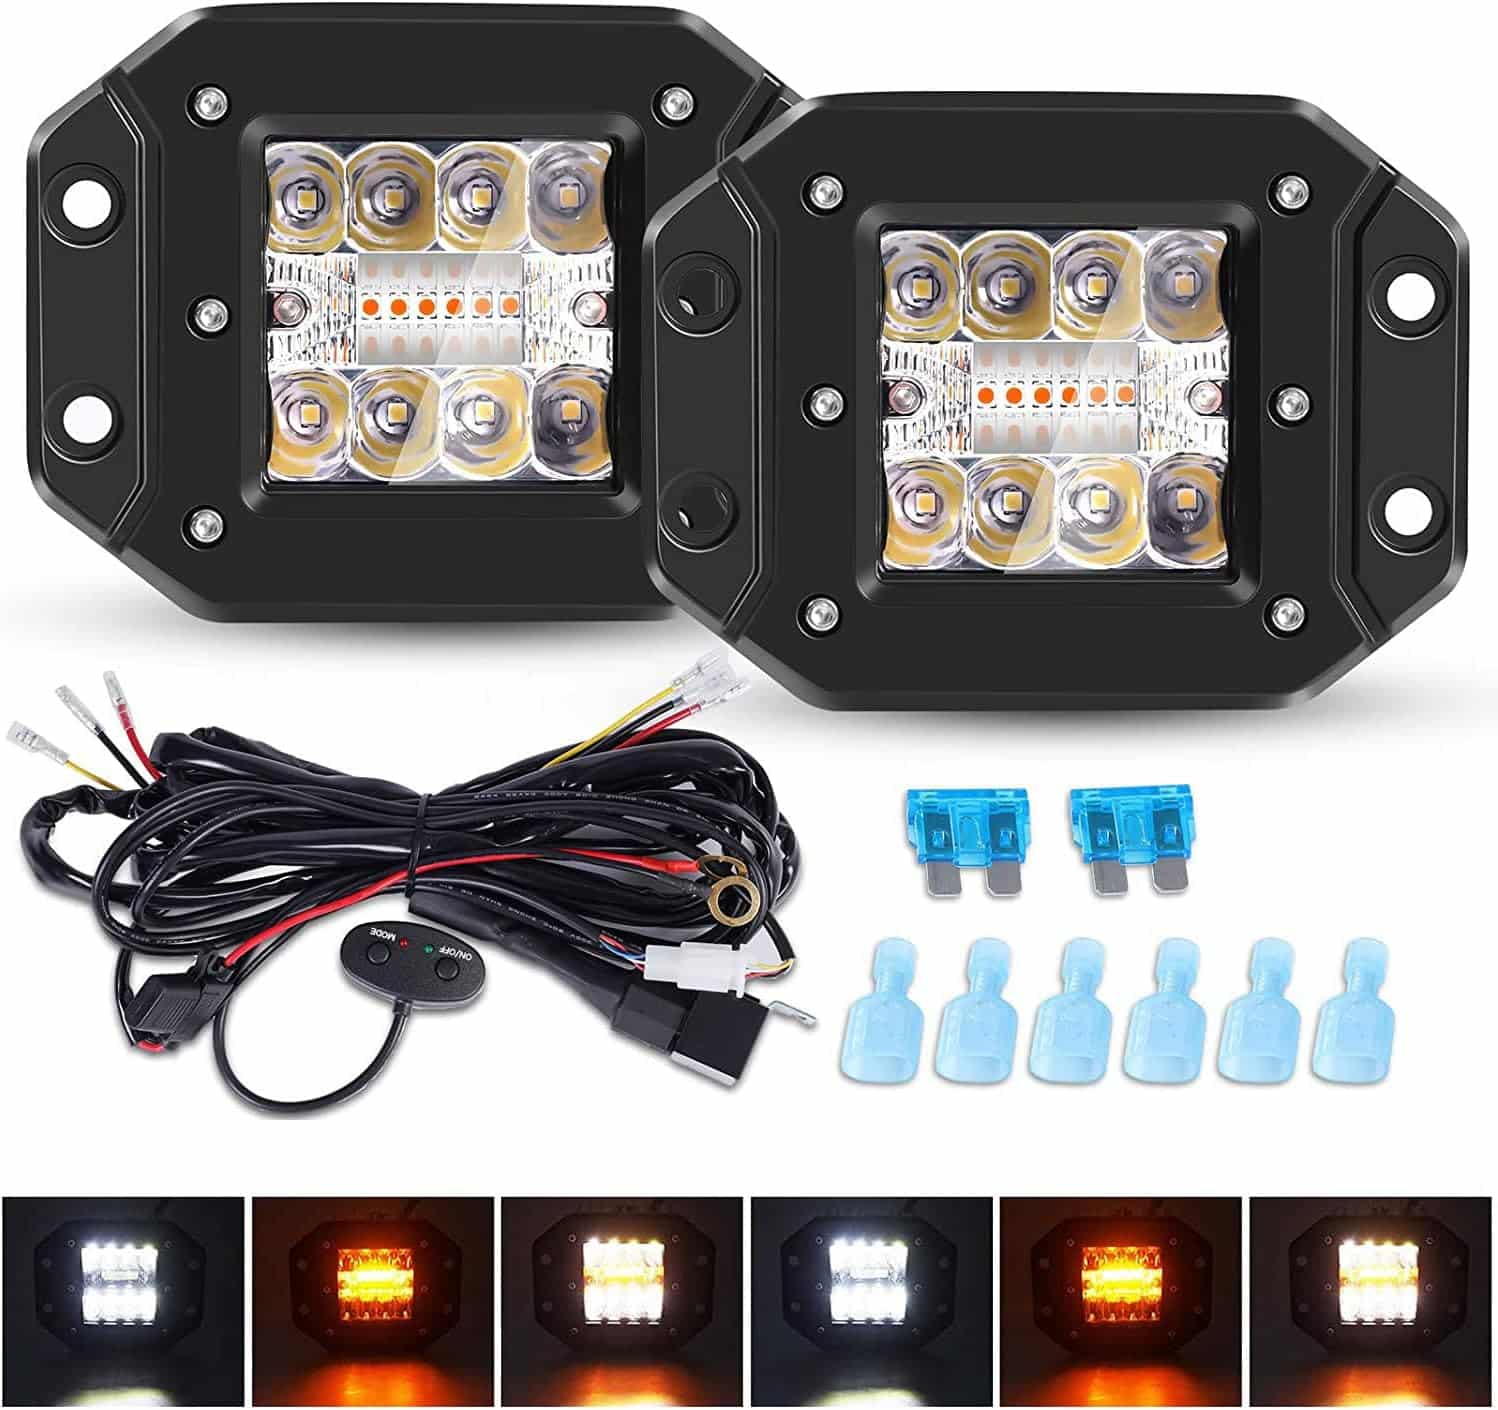 Flush Mount Led Pods Lights for Trucks, Strobe 6 Models White/Amber Dual Color 5inch LED Fog Lights Offroad Driving Light Bumper Light with Wiring Harness for Jeep SUV